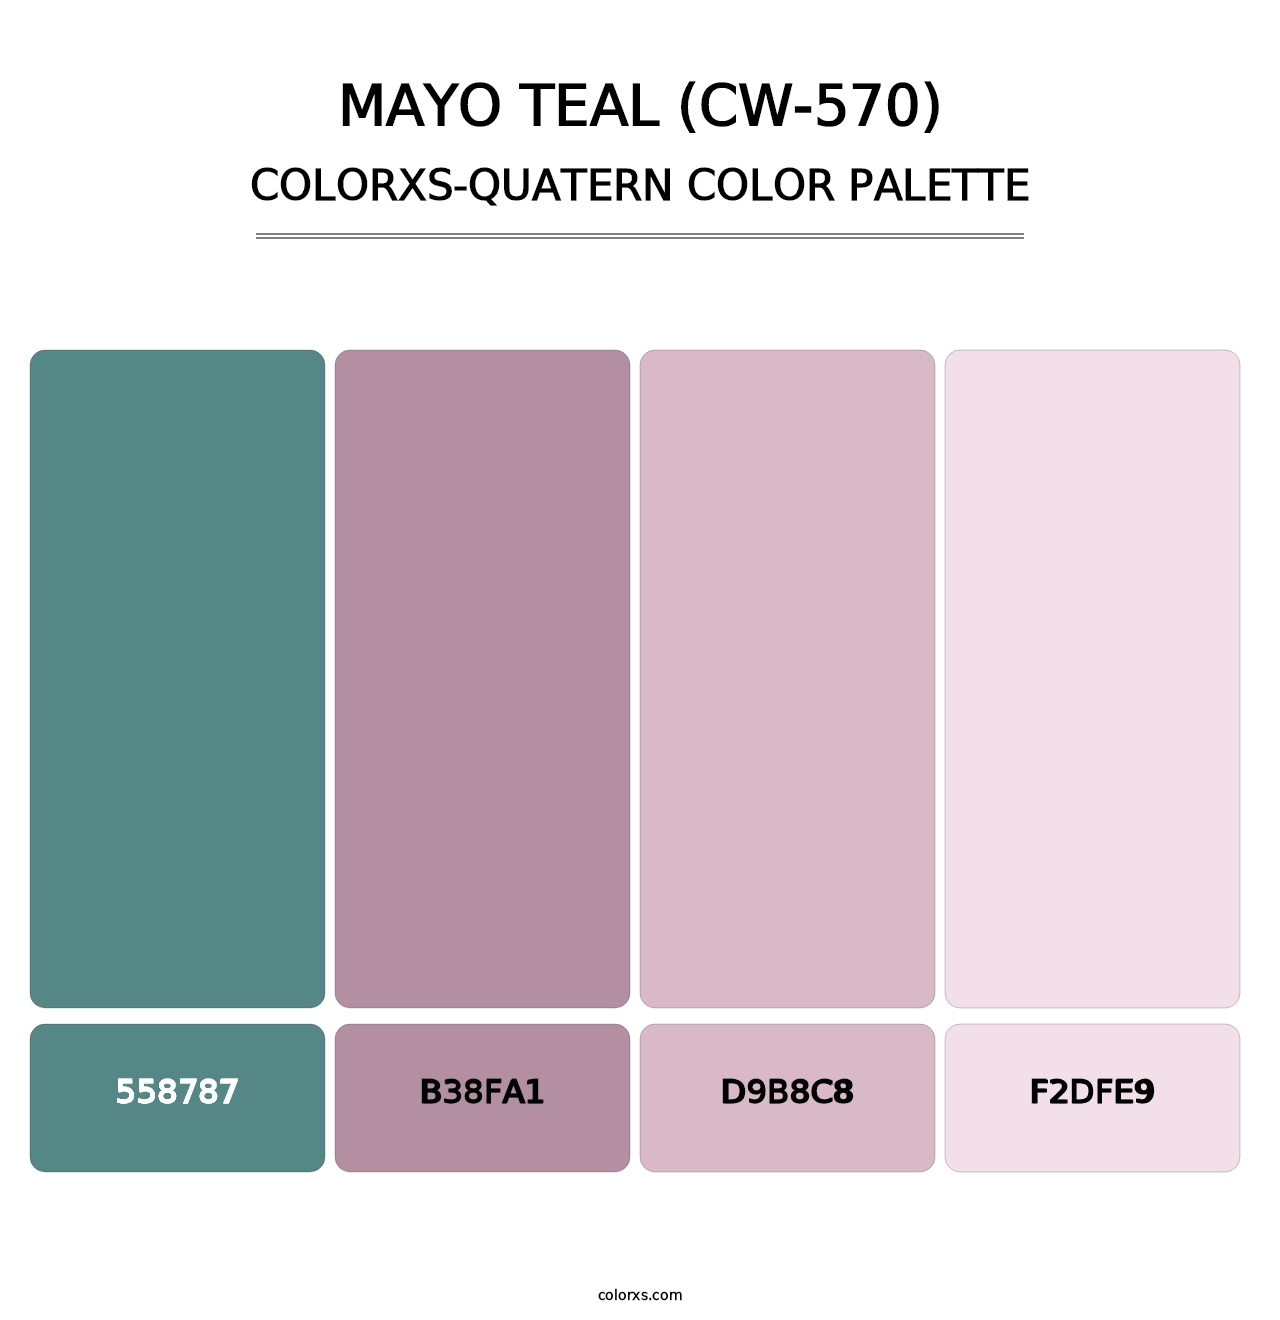 Mayo Teal (CW-570) - Colorxs Quatern Palette